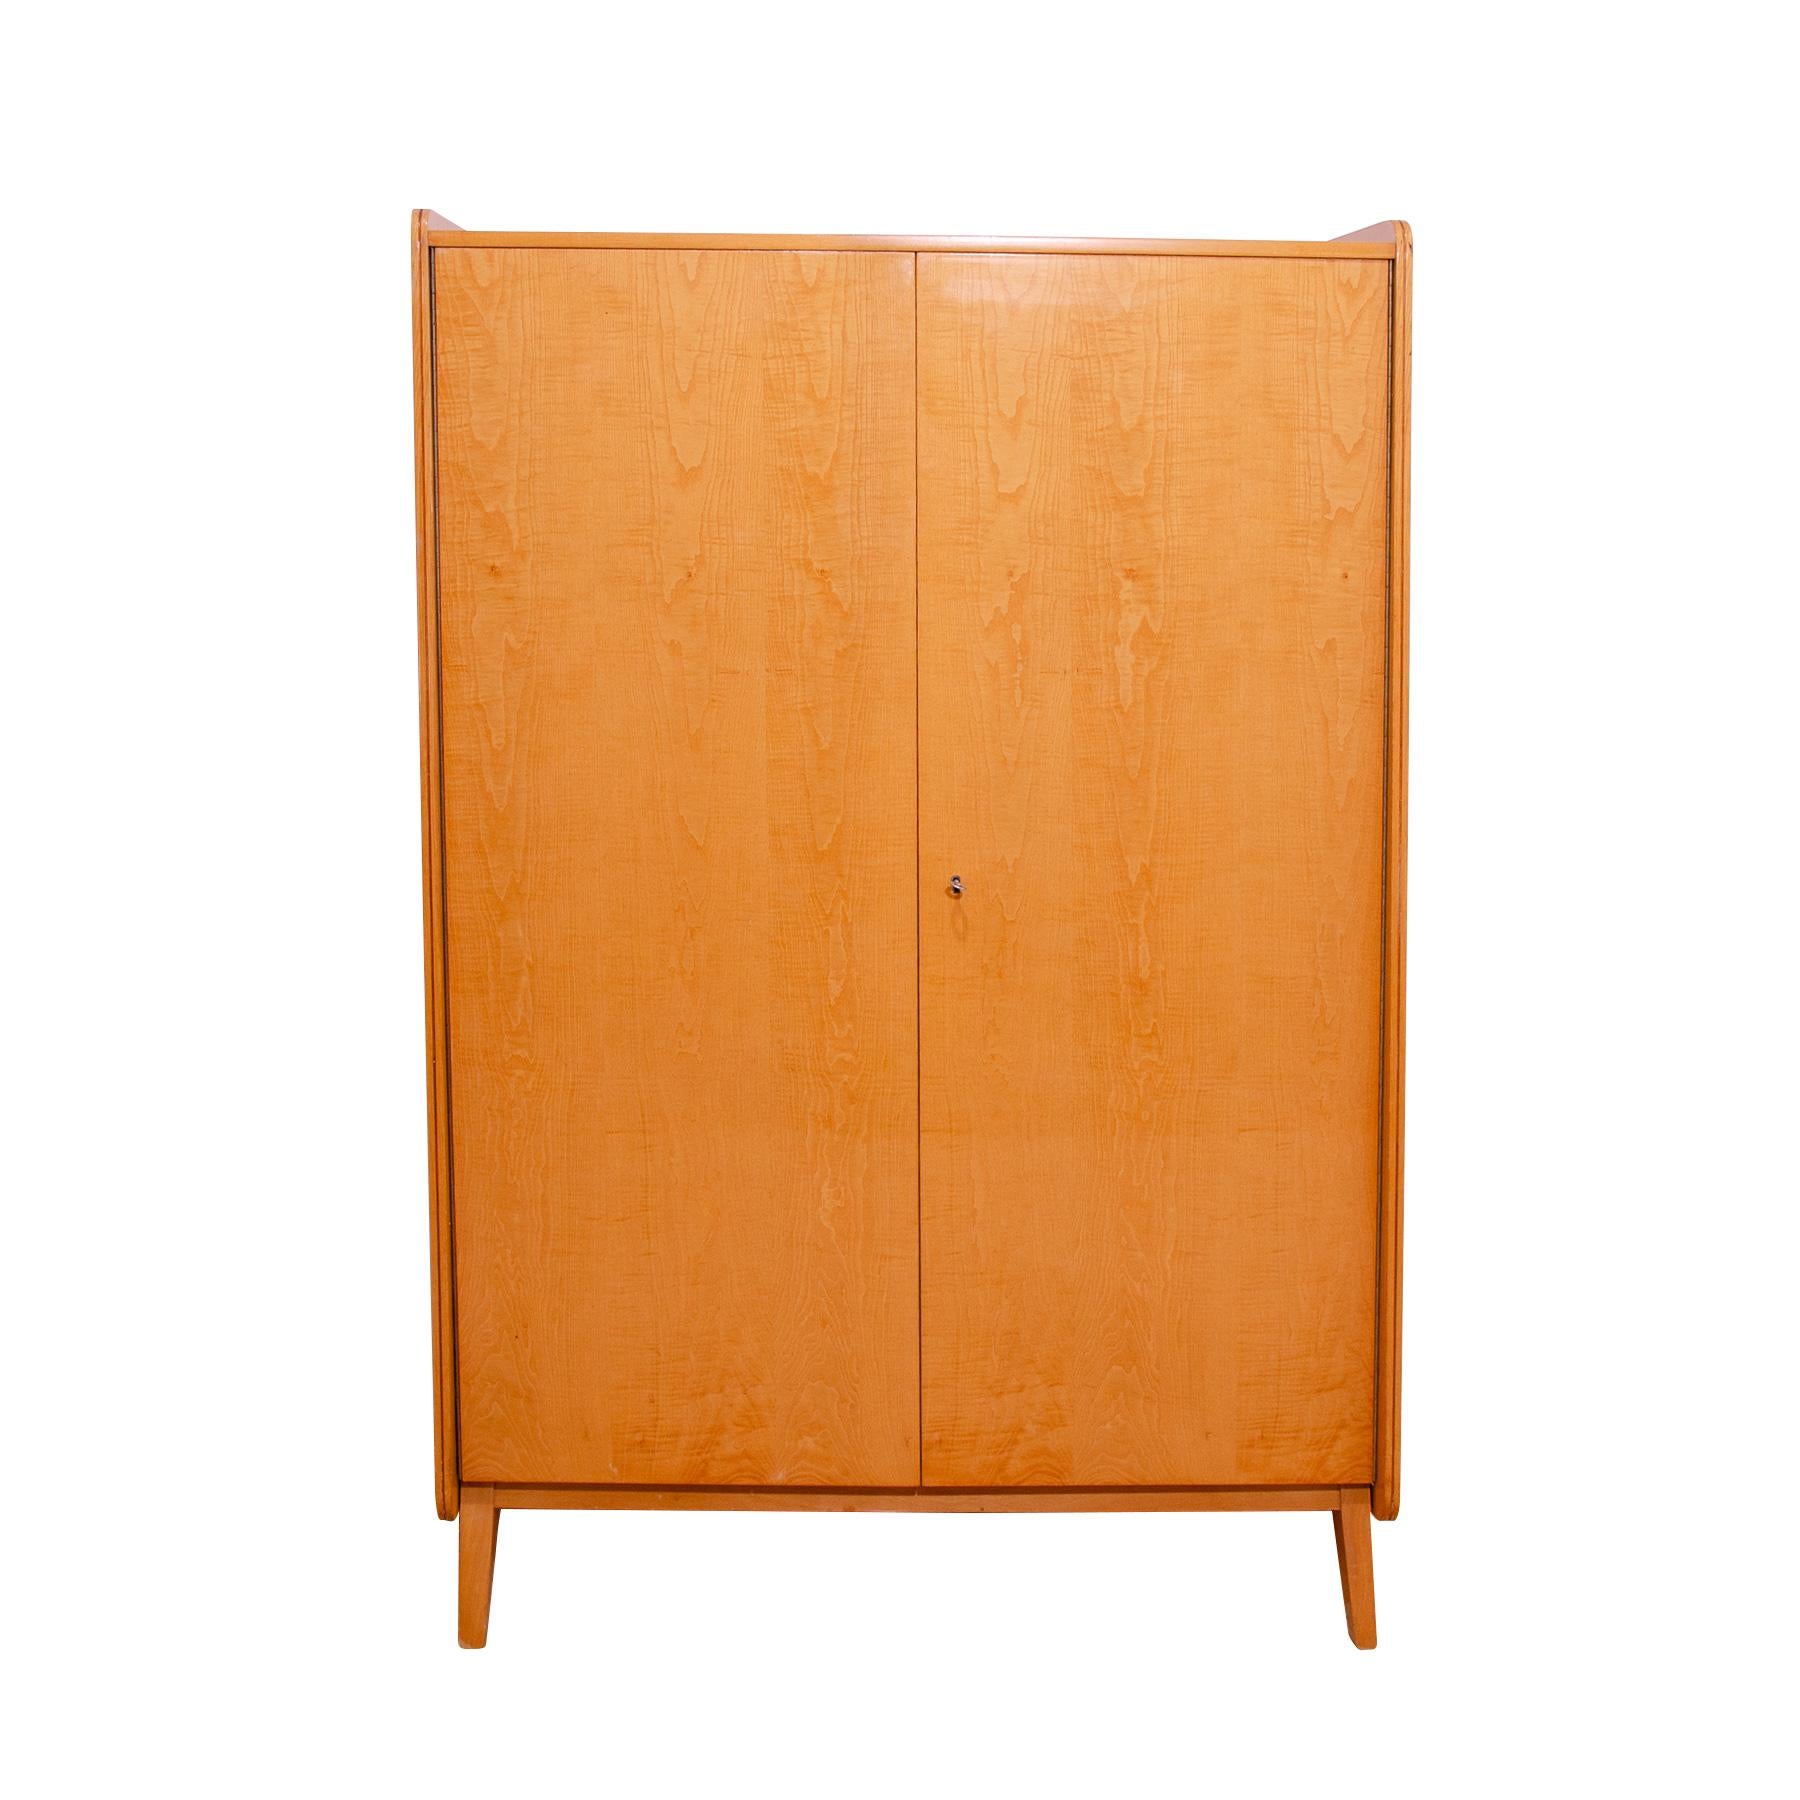 This wardrobe was designed by František Jirák for Tatra nábytok company in the former Czechoslovakia in the 1960´s

It´s made of beechwood and plywood.

You can hang your clothes in it,  place underwear, etc.

In very good Vintage condition, showing